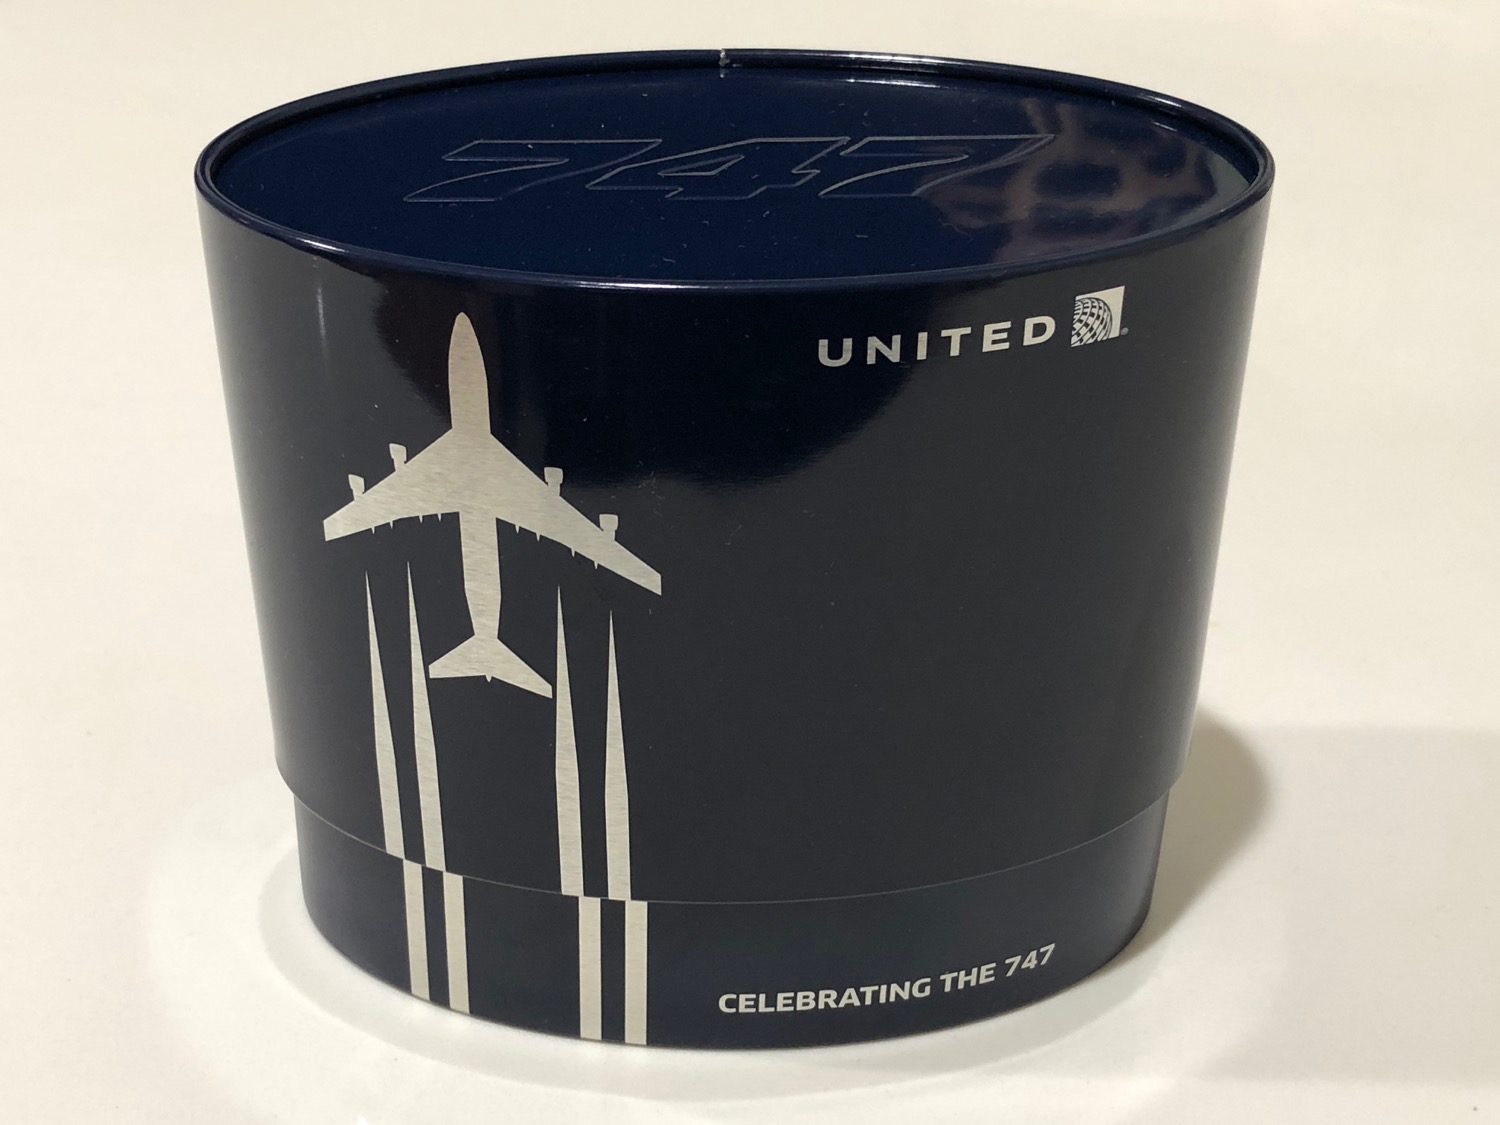 a blue round container with a plane logo